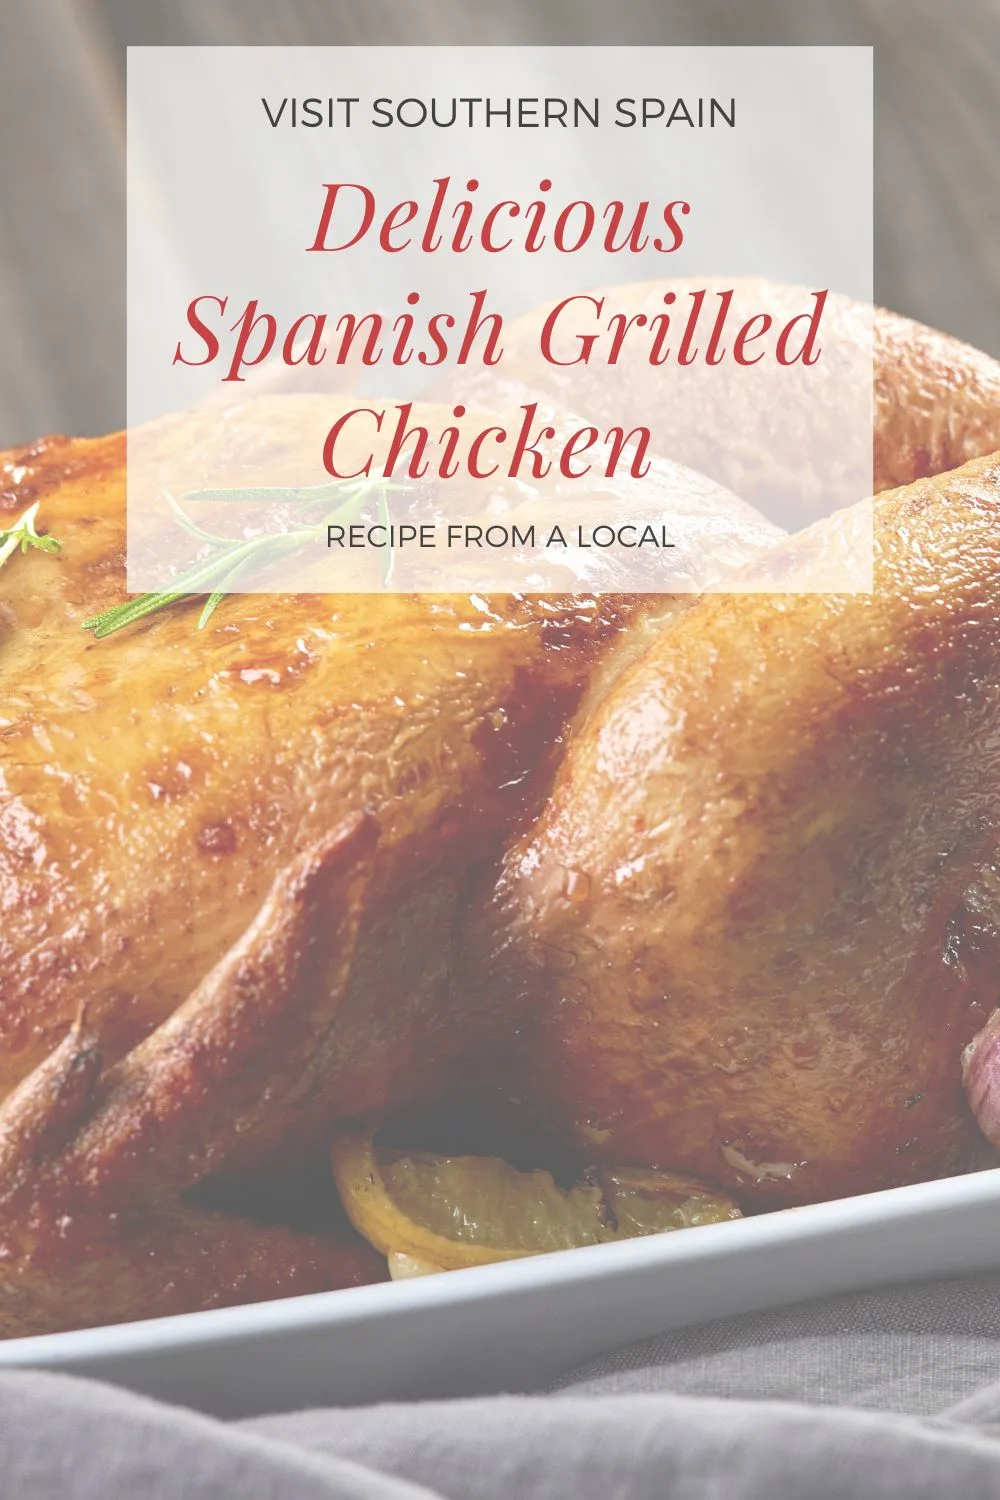 Are you looking for a Delicious Spanish Grilled Chicken Recipe? This Pollo Asado recipe is one of the best ways to cook chicken. The grilled Spanish chicken is so famous that you will find it at almost every corner in Spain and it's incredibly delicious. The secret to this Spanish-style grilled chicken is the seasoning and being roasted whole. Don't look for other roasted chicken recipe ideas because this is the one you need. #spanishgrilledchicken #grilledchicken #polloasado #roastedchicken